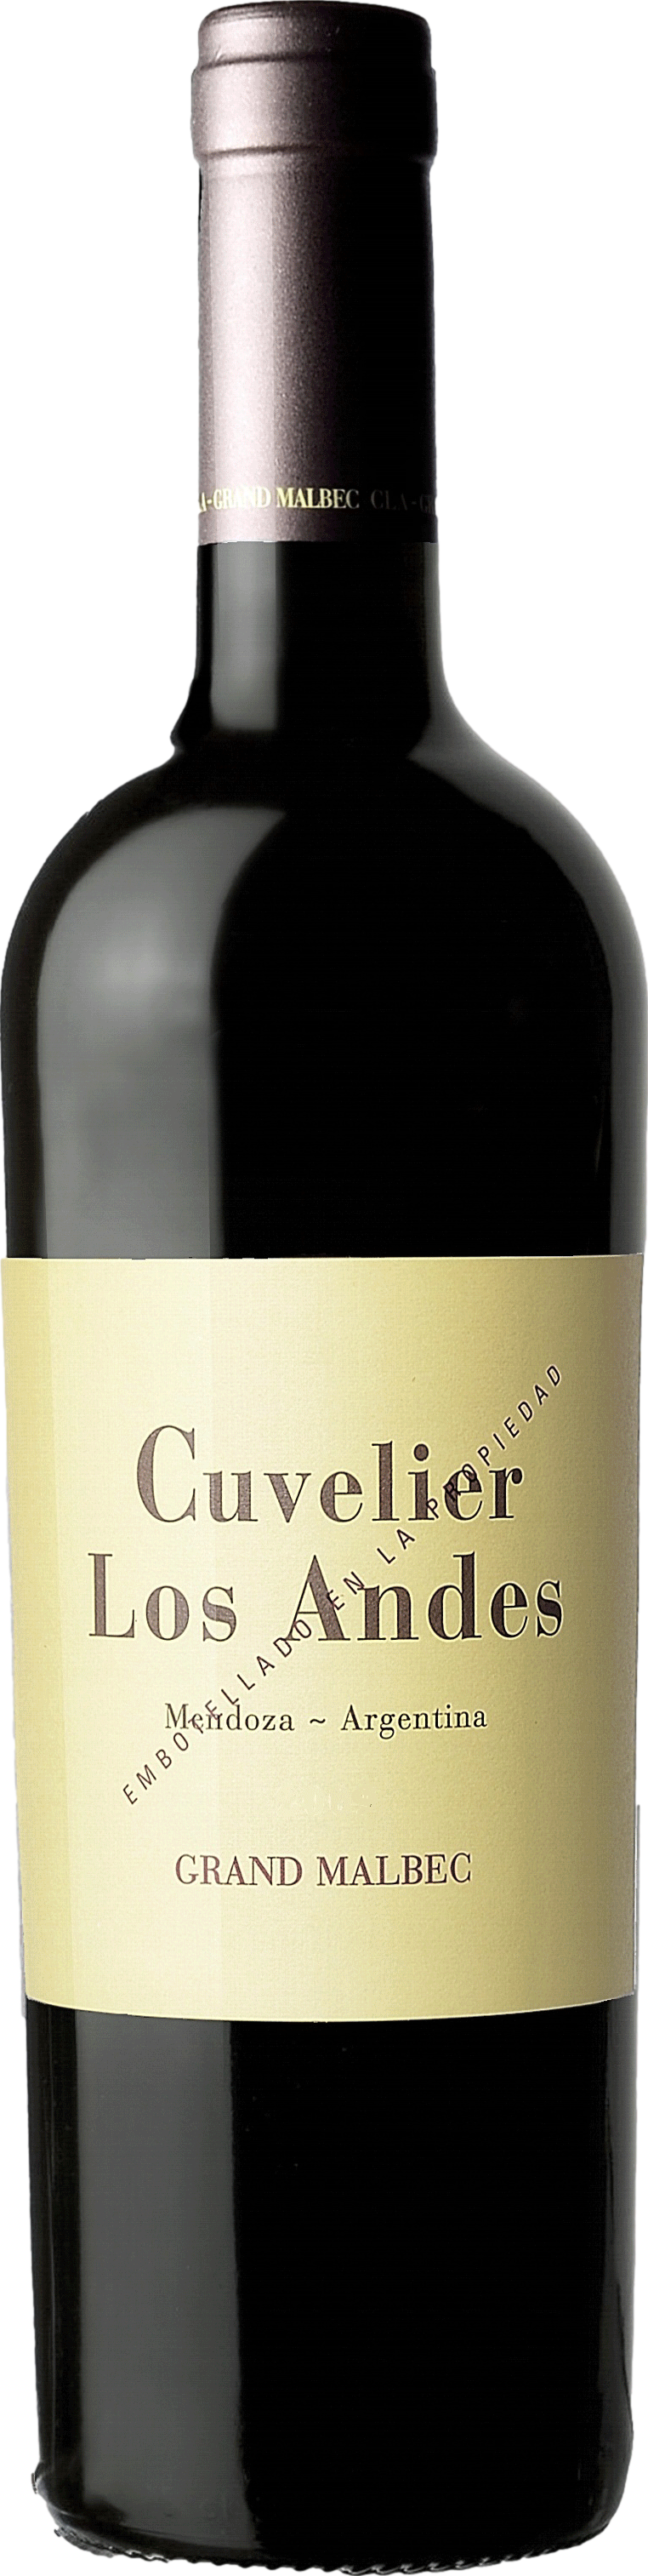 Cuvelier Los Andes Grand Malbec 2016 Cuvelier Family 8wines DACH